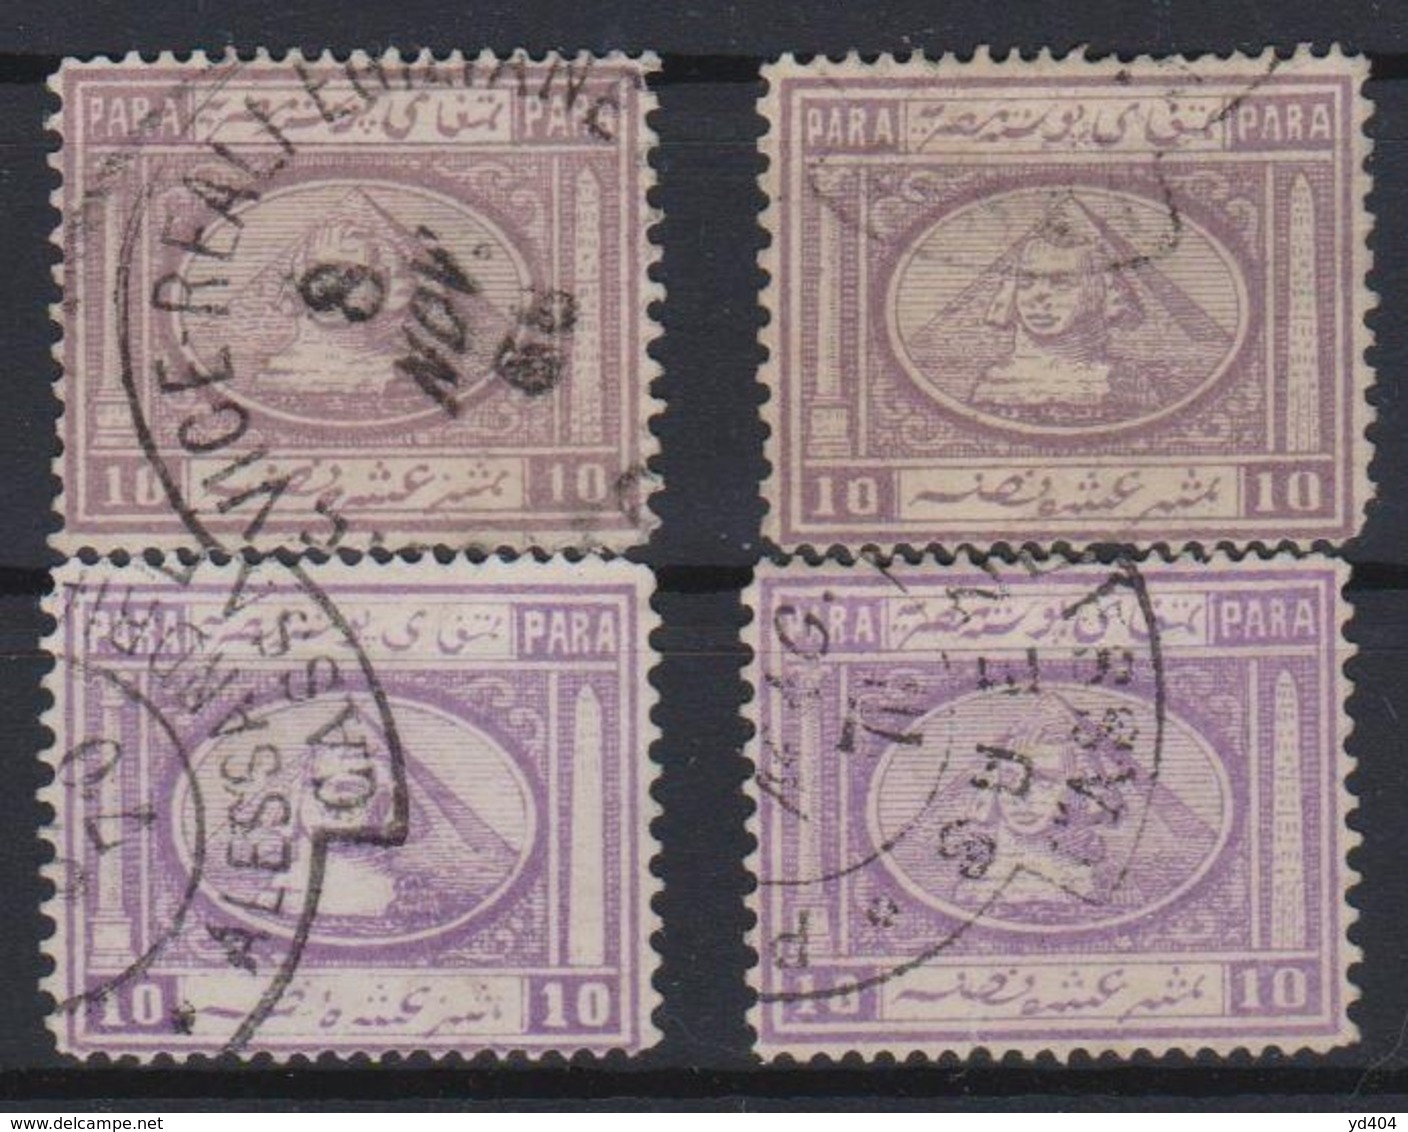 E010 – EGYPTE – EGYPT – 1867 - SECOND ISSUE – SPHINX & PYRAMID / 4 TYPES - Y&T # 9 (x4) USED 60 € - 1866-1914 Ägypten Khediva